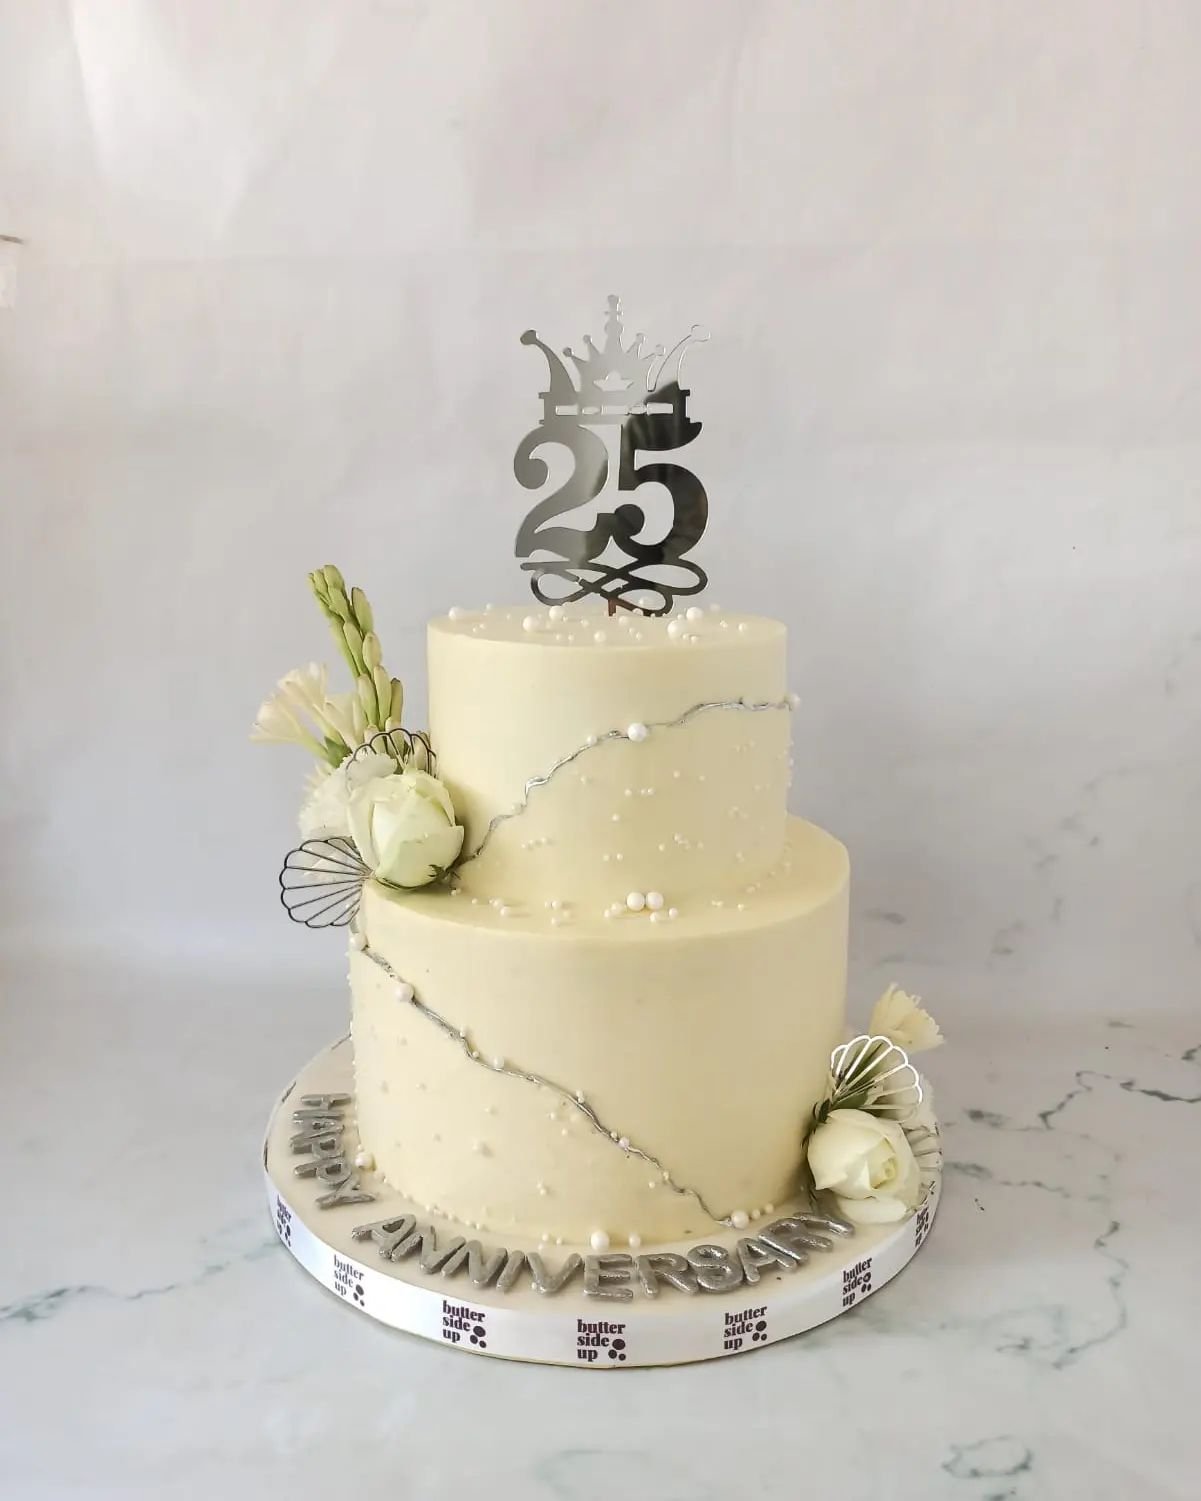 Simple 25th wedding anniversary cake
[ buttercream cakes, two tier cake, acrylic topper, real flowers]